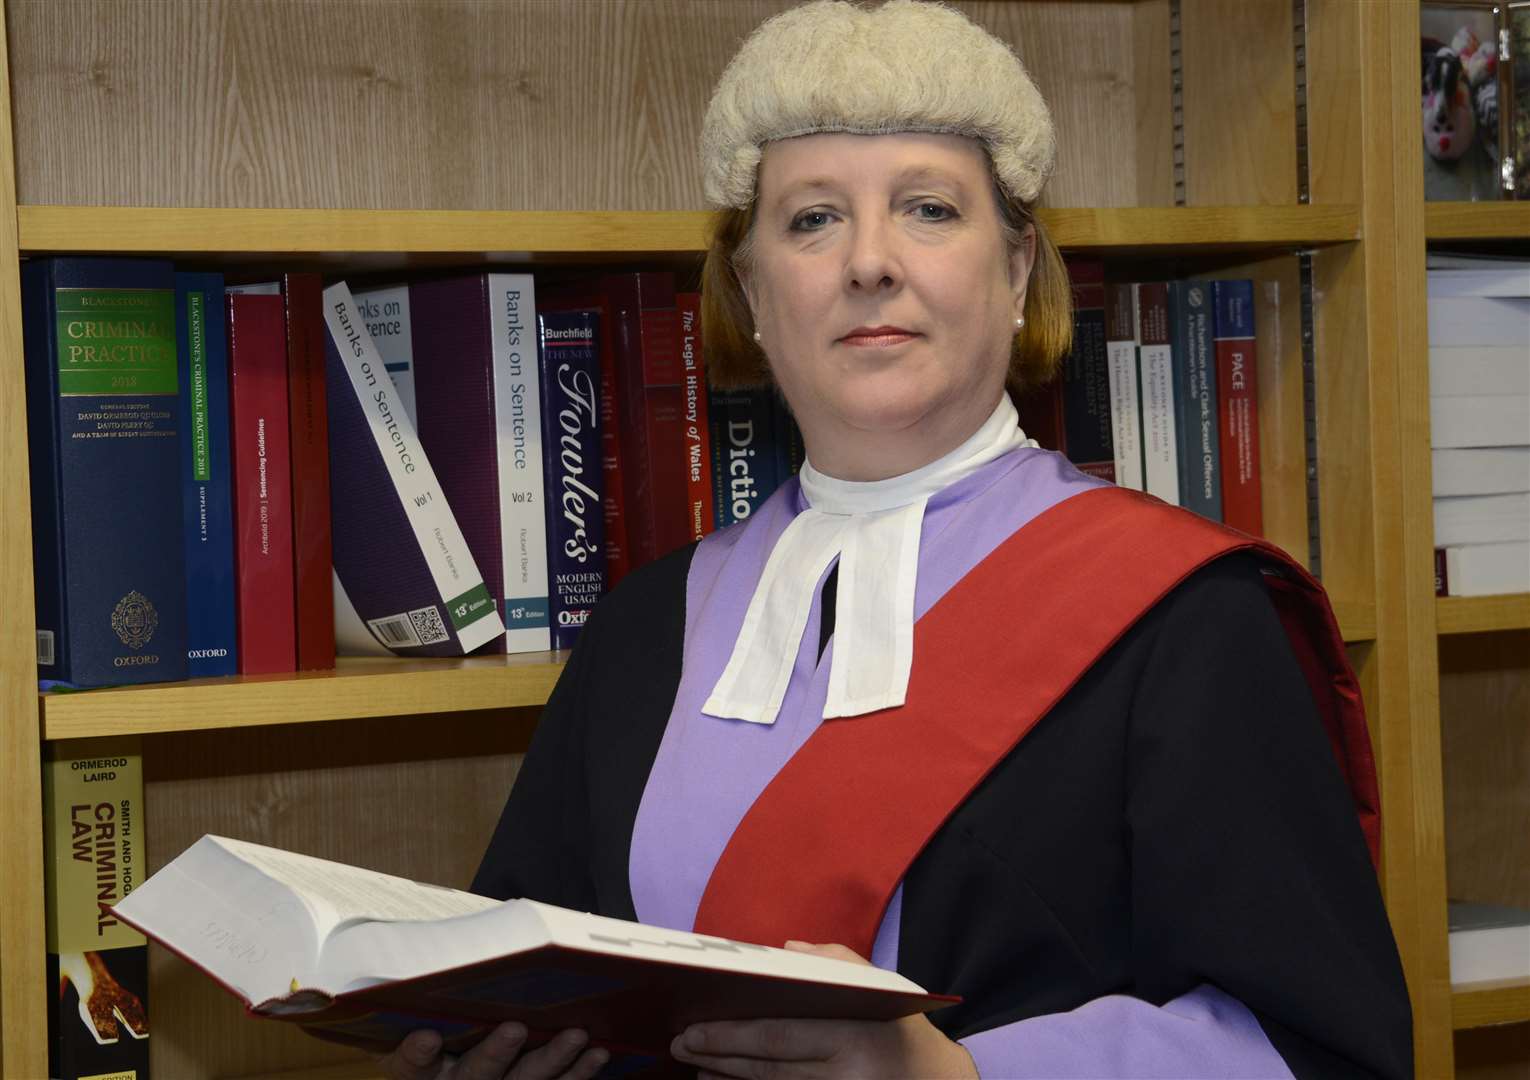 Judge Catherine Brown described the moving images as "appalling"